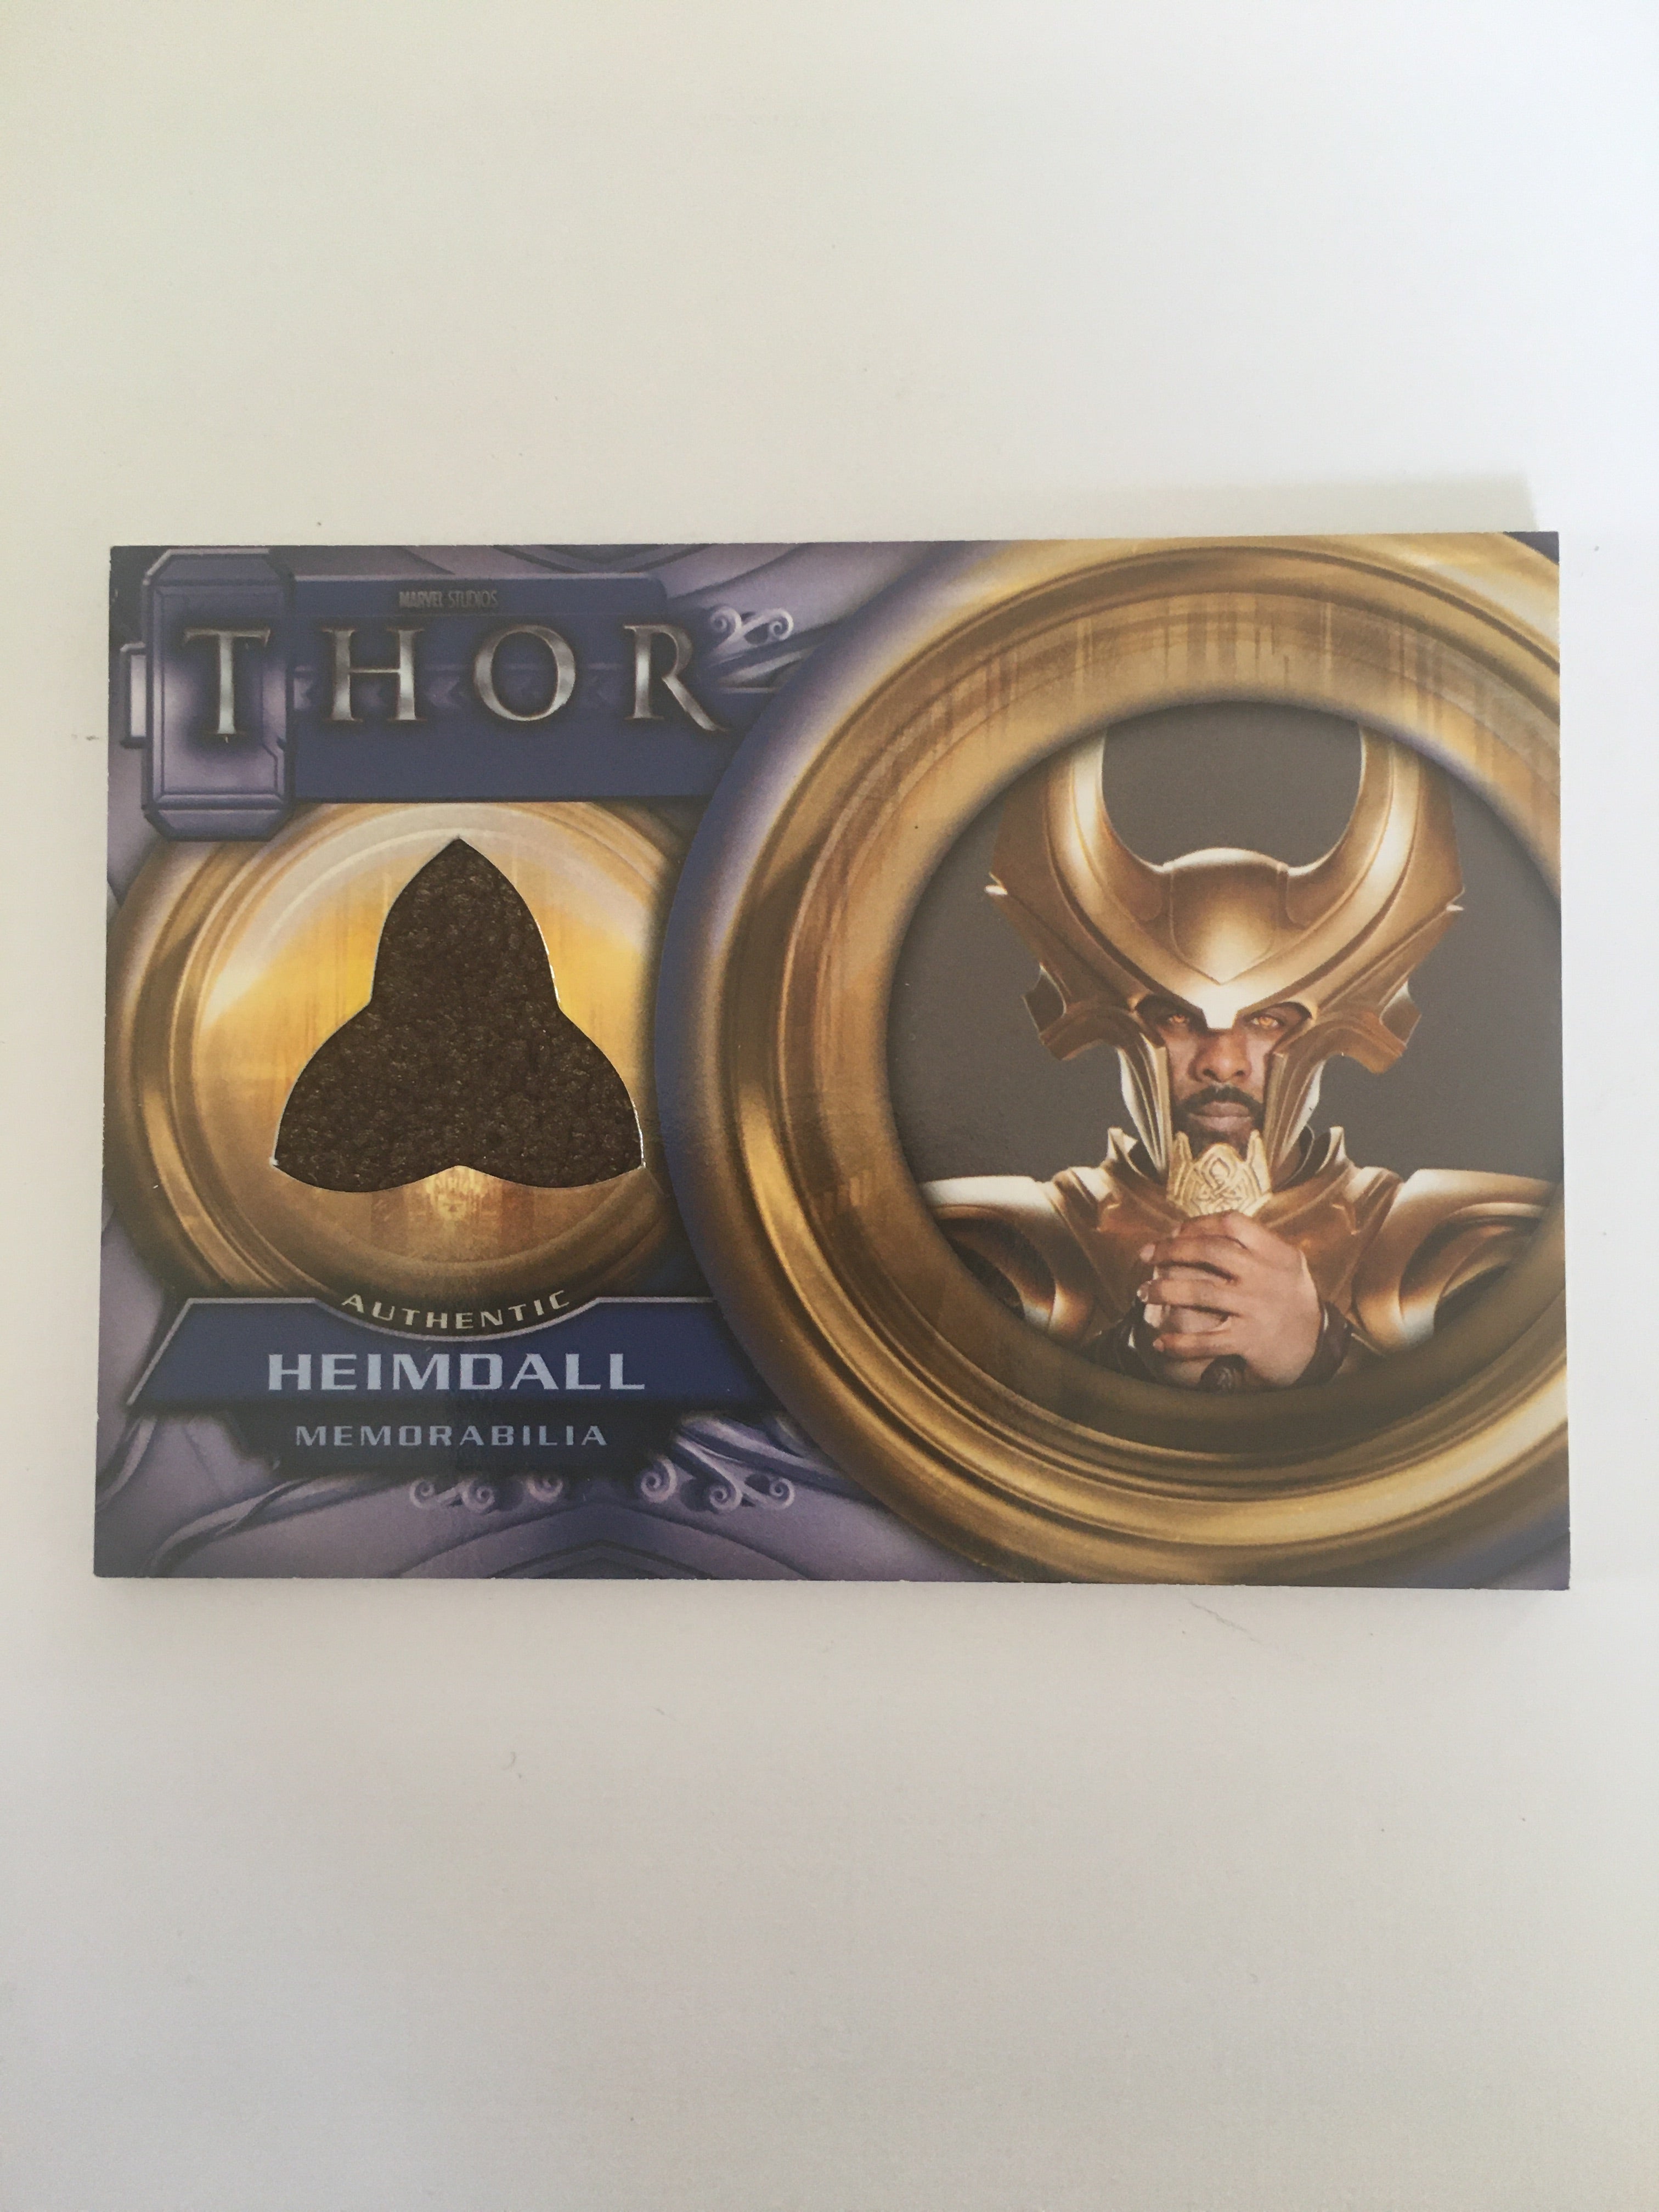 THOR COSTUME (HEIMDALL) - Limited & Rare Trading Card